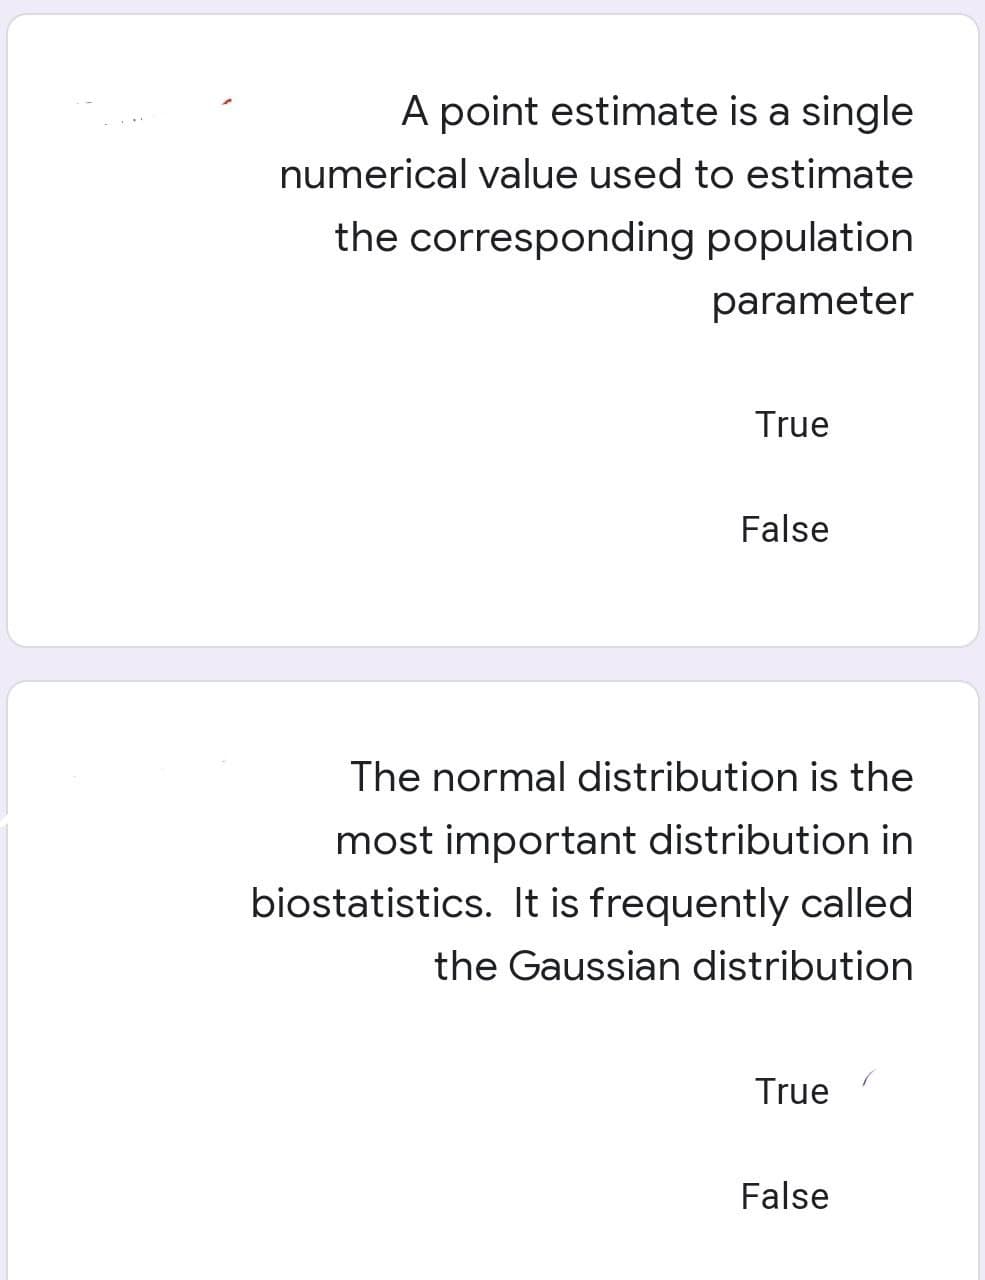 A point estimate is a single
numerical value used to estimate
the corresponding population
parameter
True
False
The normal distribution is the
most important distribution in
biostatistics. It is frequently called
the Gaussian distribution
True
False